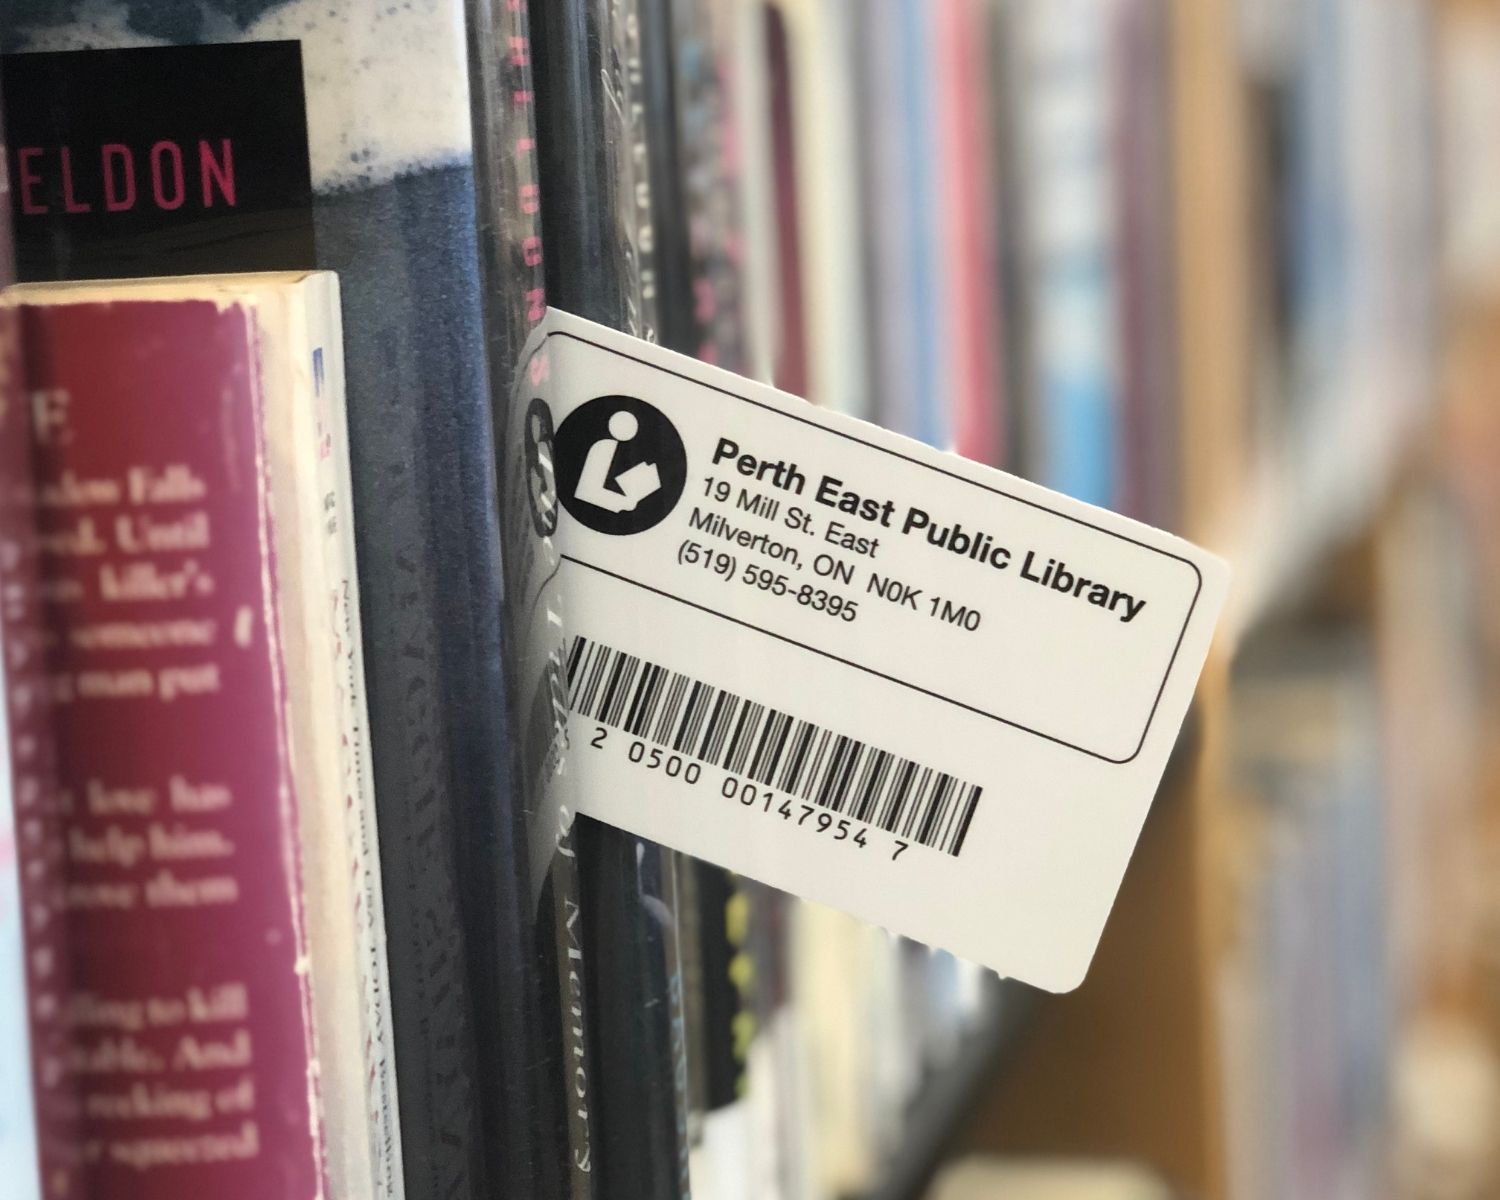 A Perth East Public Library card slid within a book shelf